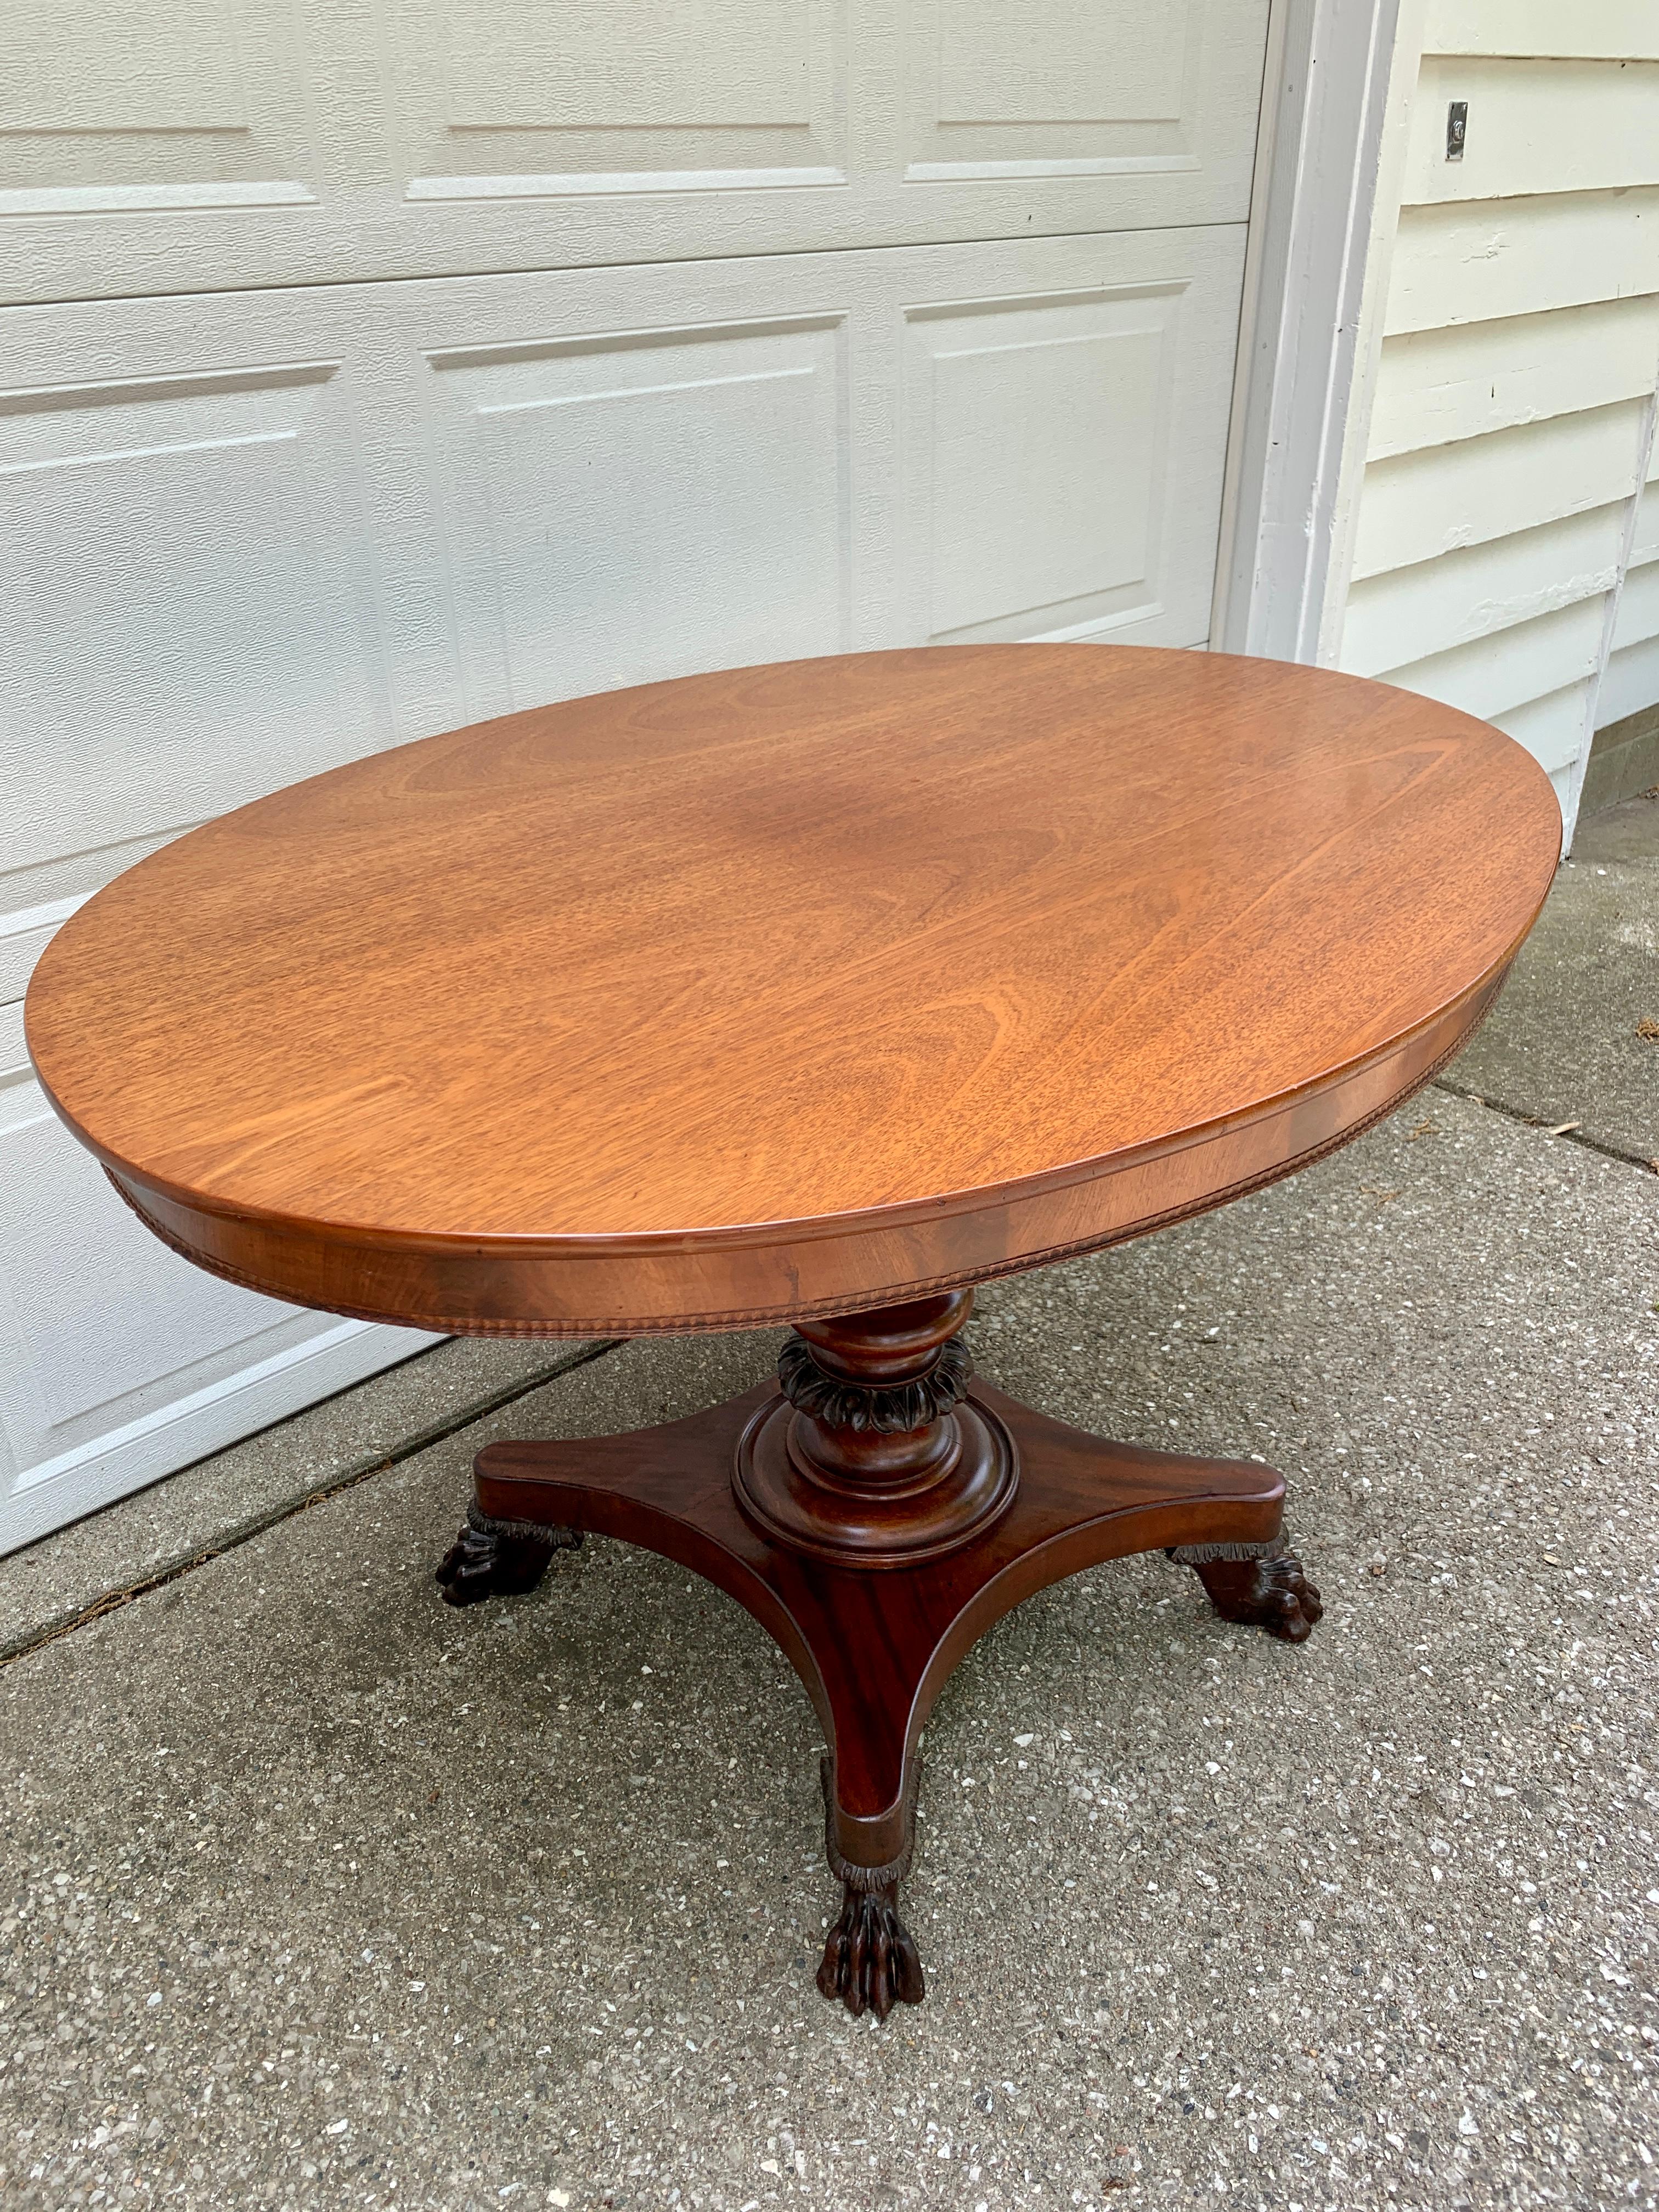 Antique American Empire Mahogany Paw Foot Pedestal Center Table For Sale 1